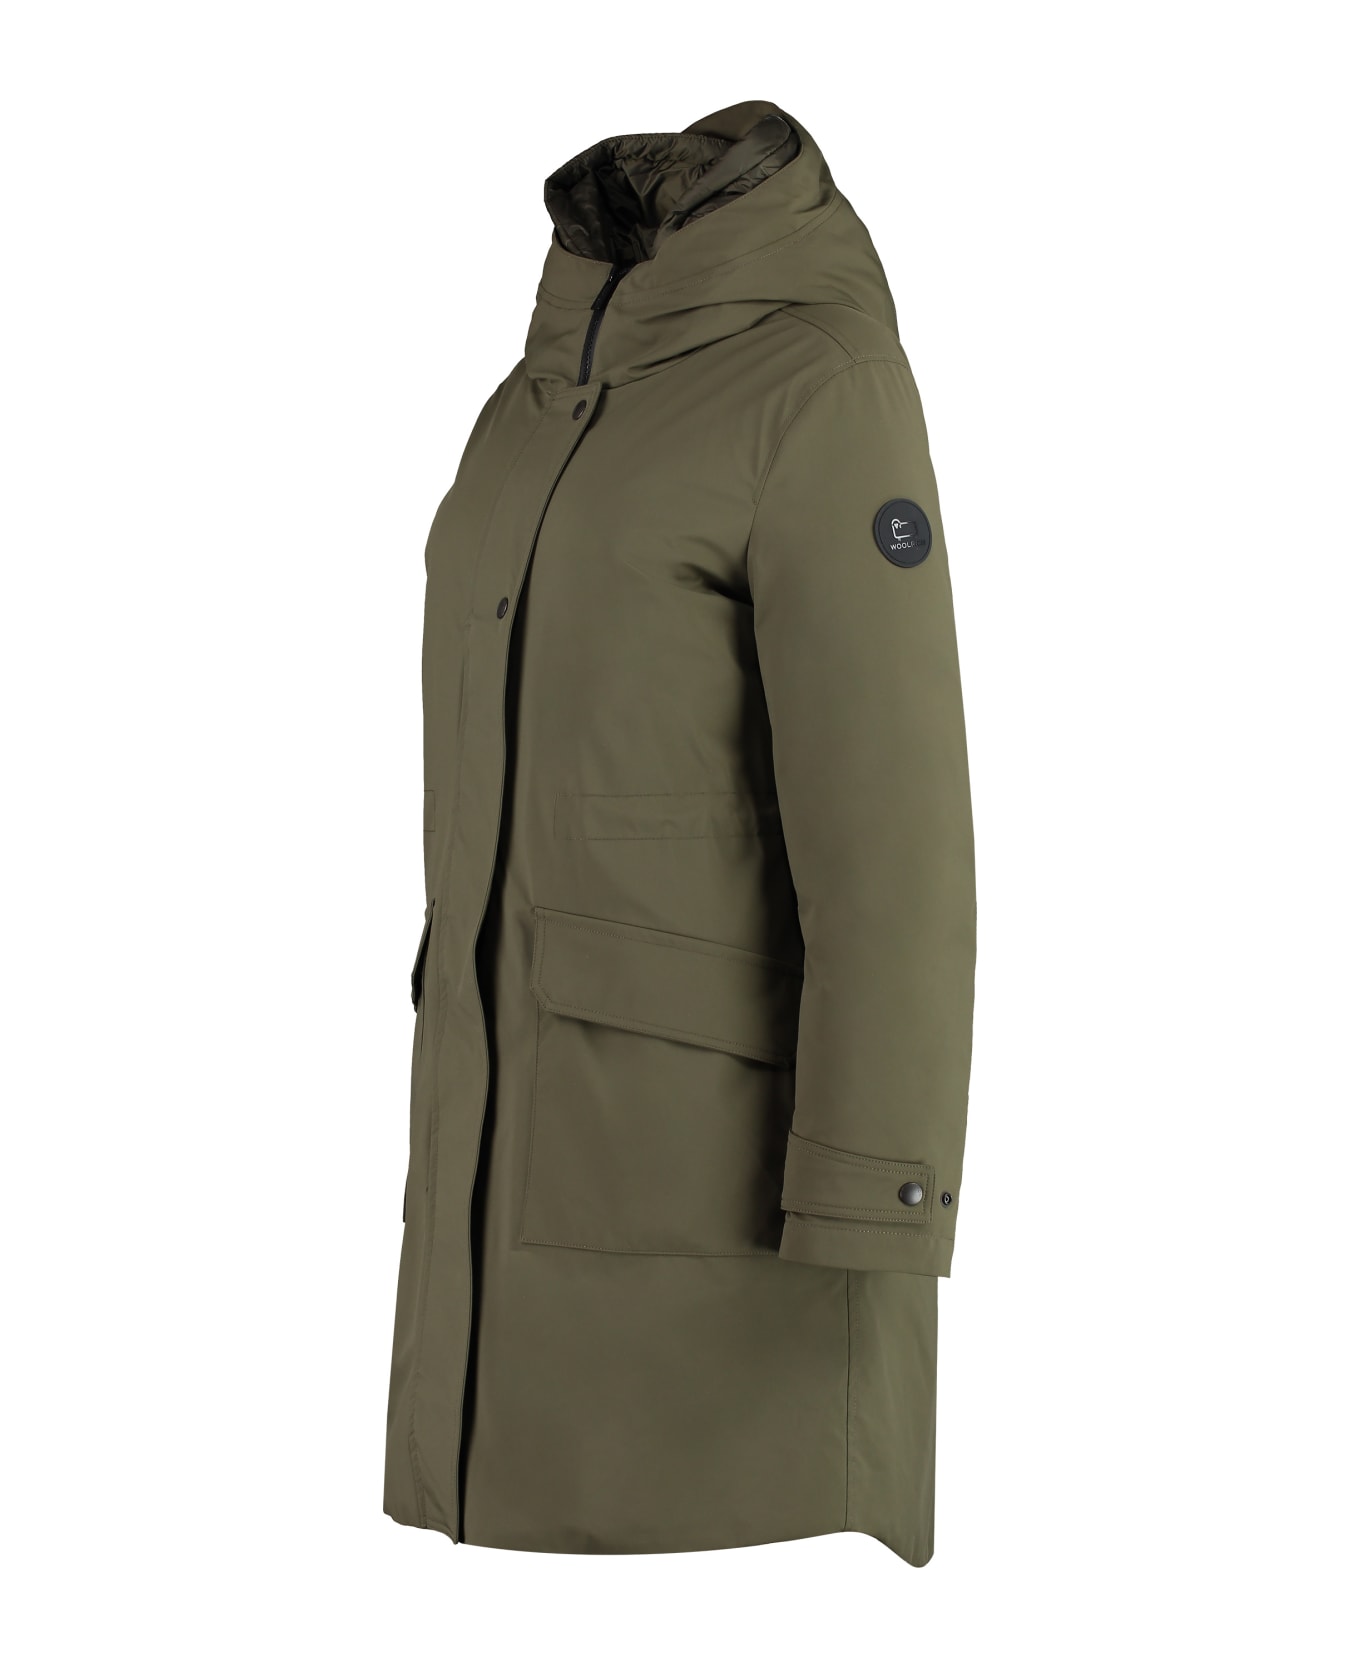 Woolrich Military Technical Fabric Parka With Internal Removable Down Jacket - green コート